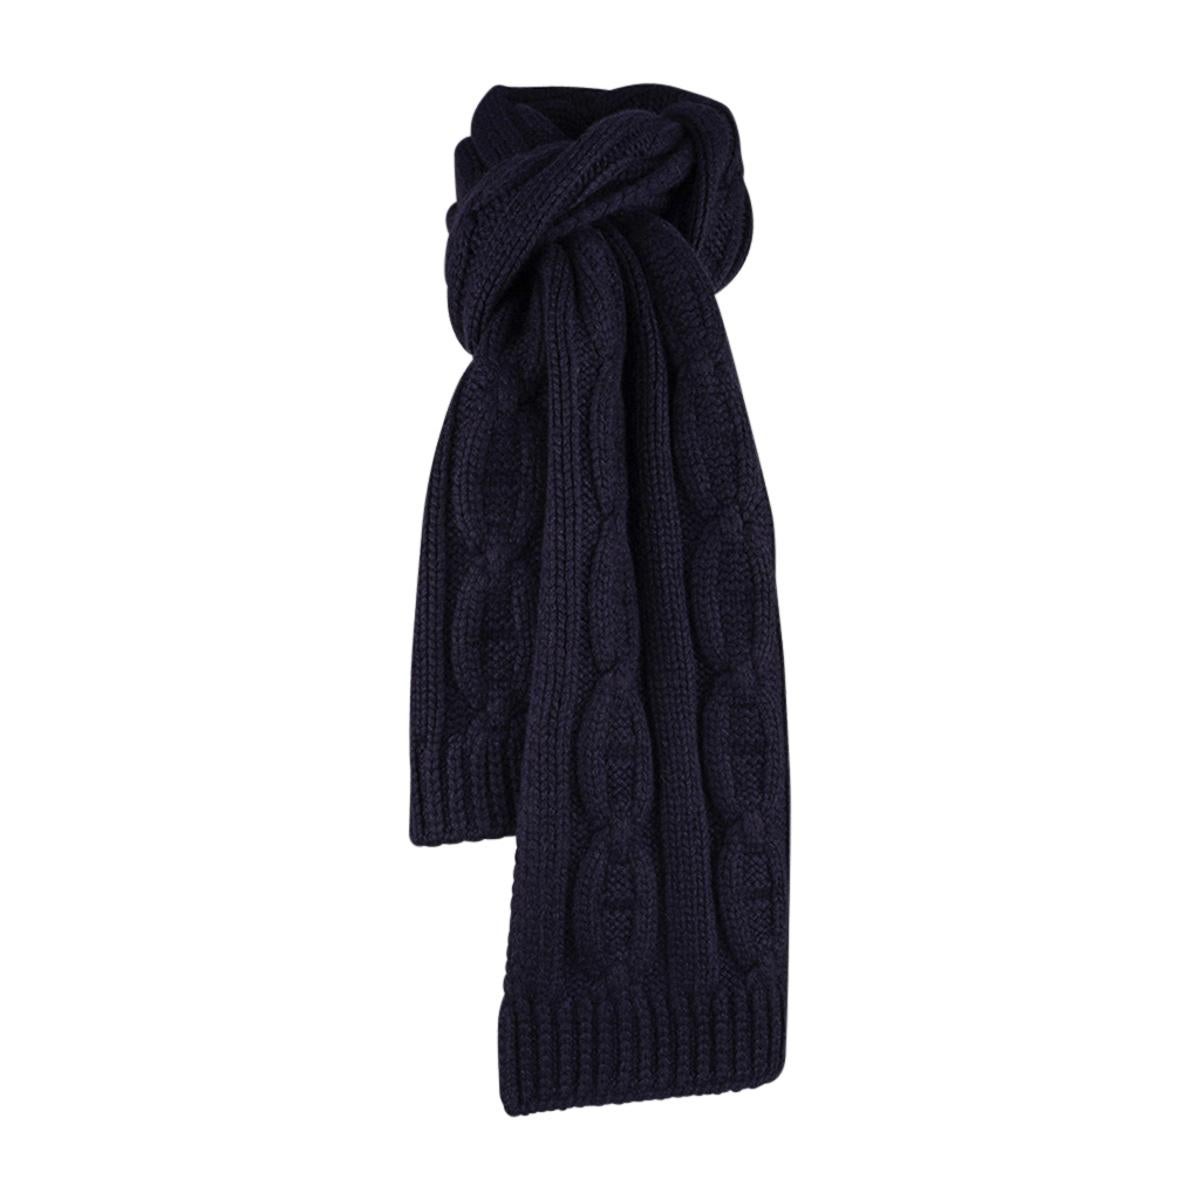 Mightychic offers an Hermes Tri Maillon Muffler featured in Marine.
Muffler is oversized with the iconic chaine d'ancre woven throughout.
Fabric is 100% cashmere.
Made in Italy.
Companion Bleu Marine Beanie under separate listing.
NEW or NEVER